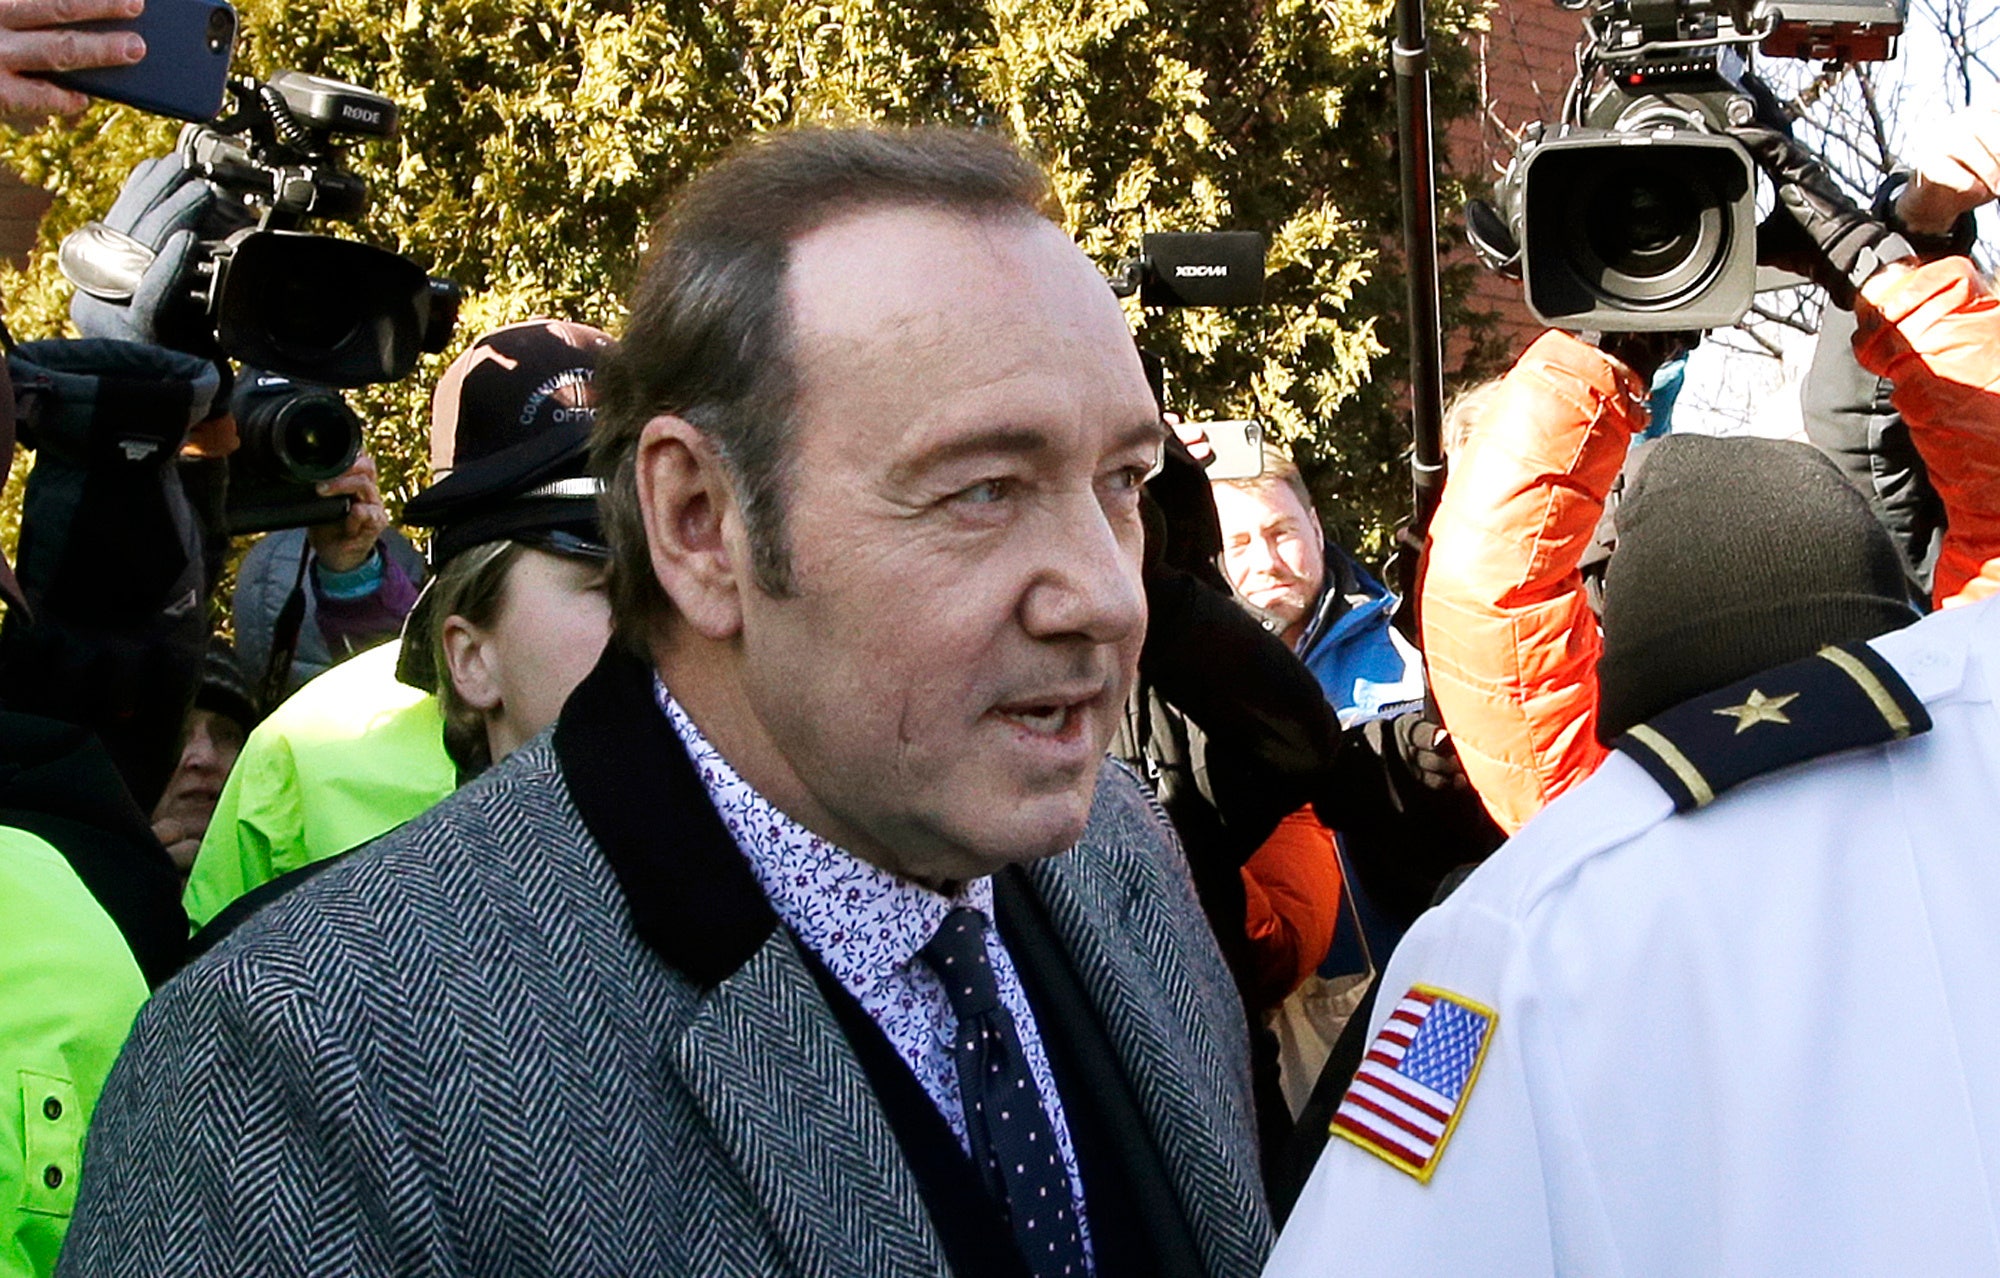 Kevin Spacey lawyer says actor’s accuser deleted ‘exculpatory’ messages